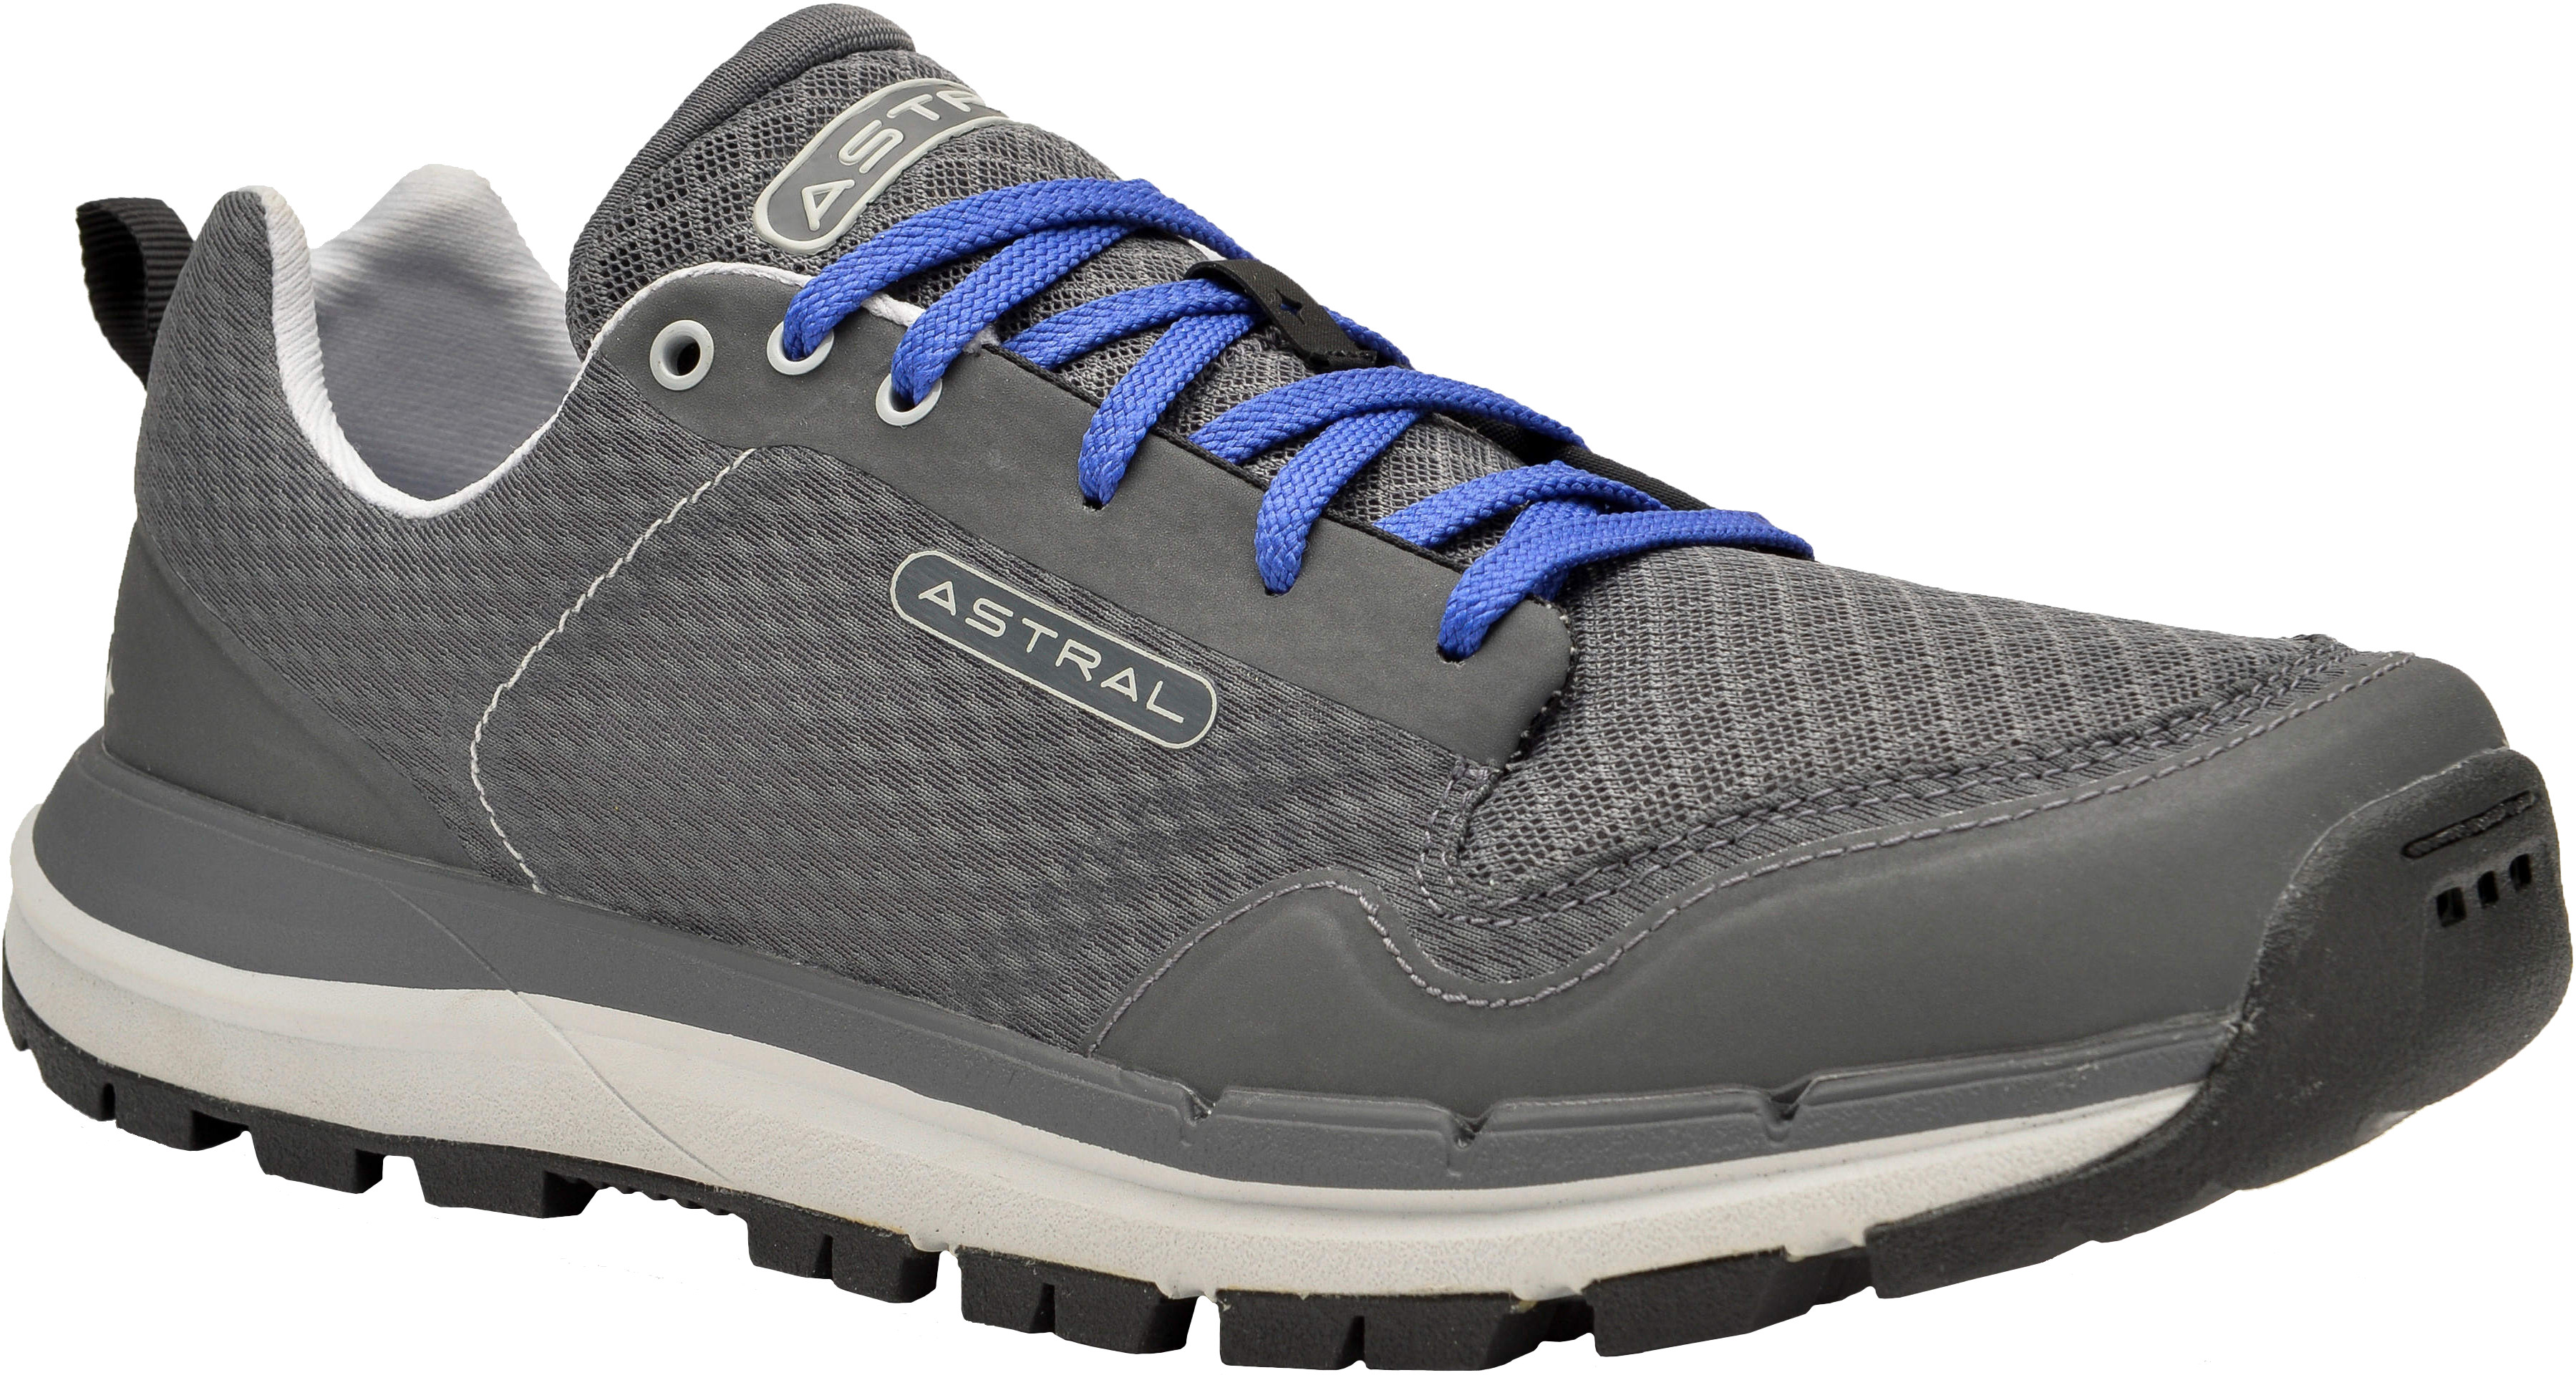 astral tr1 mesh hiking shoes